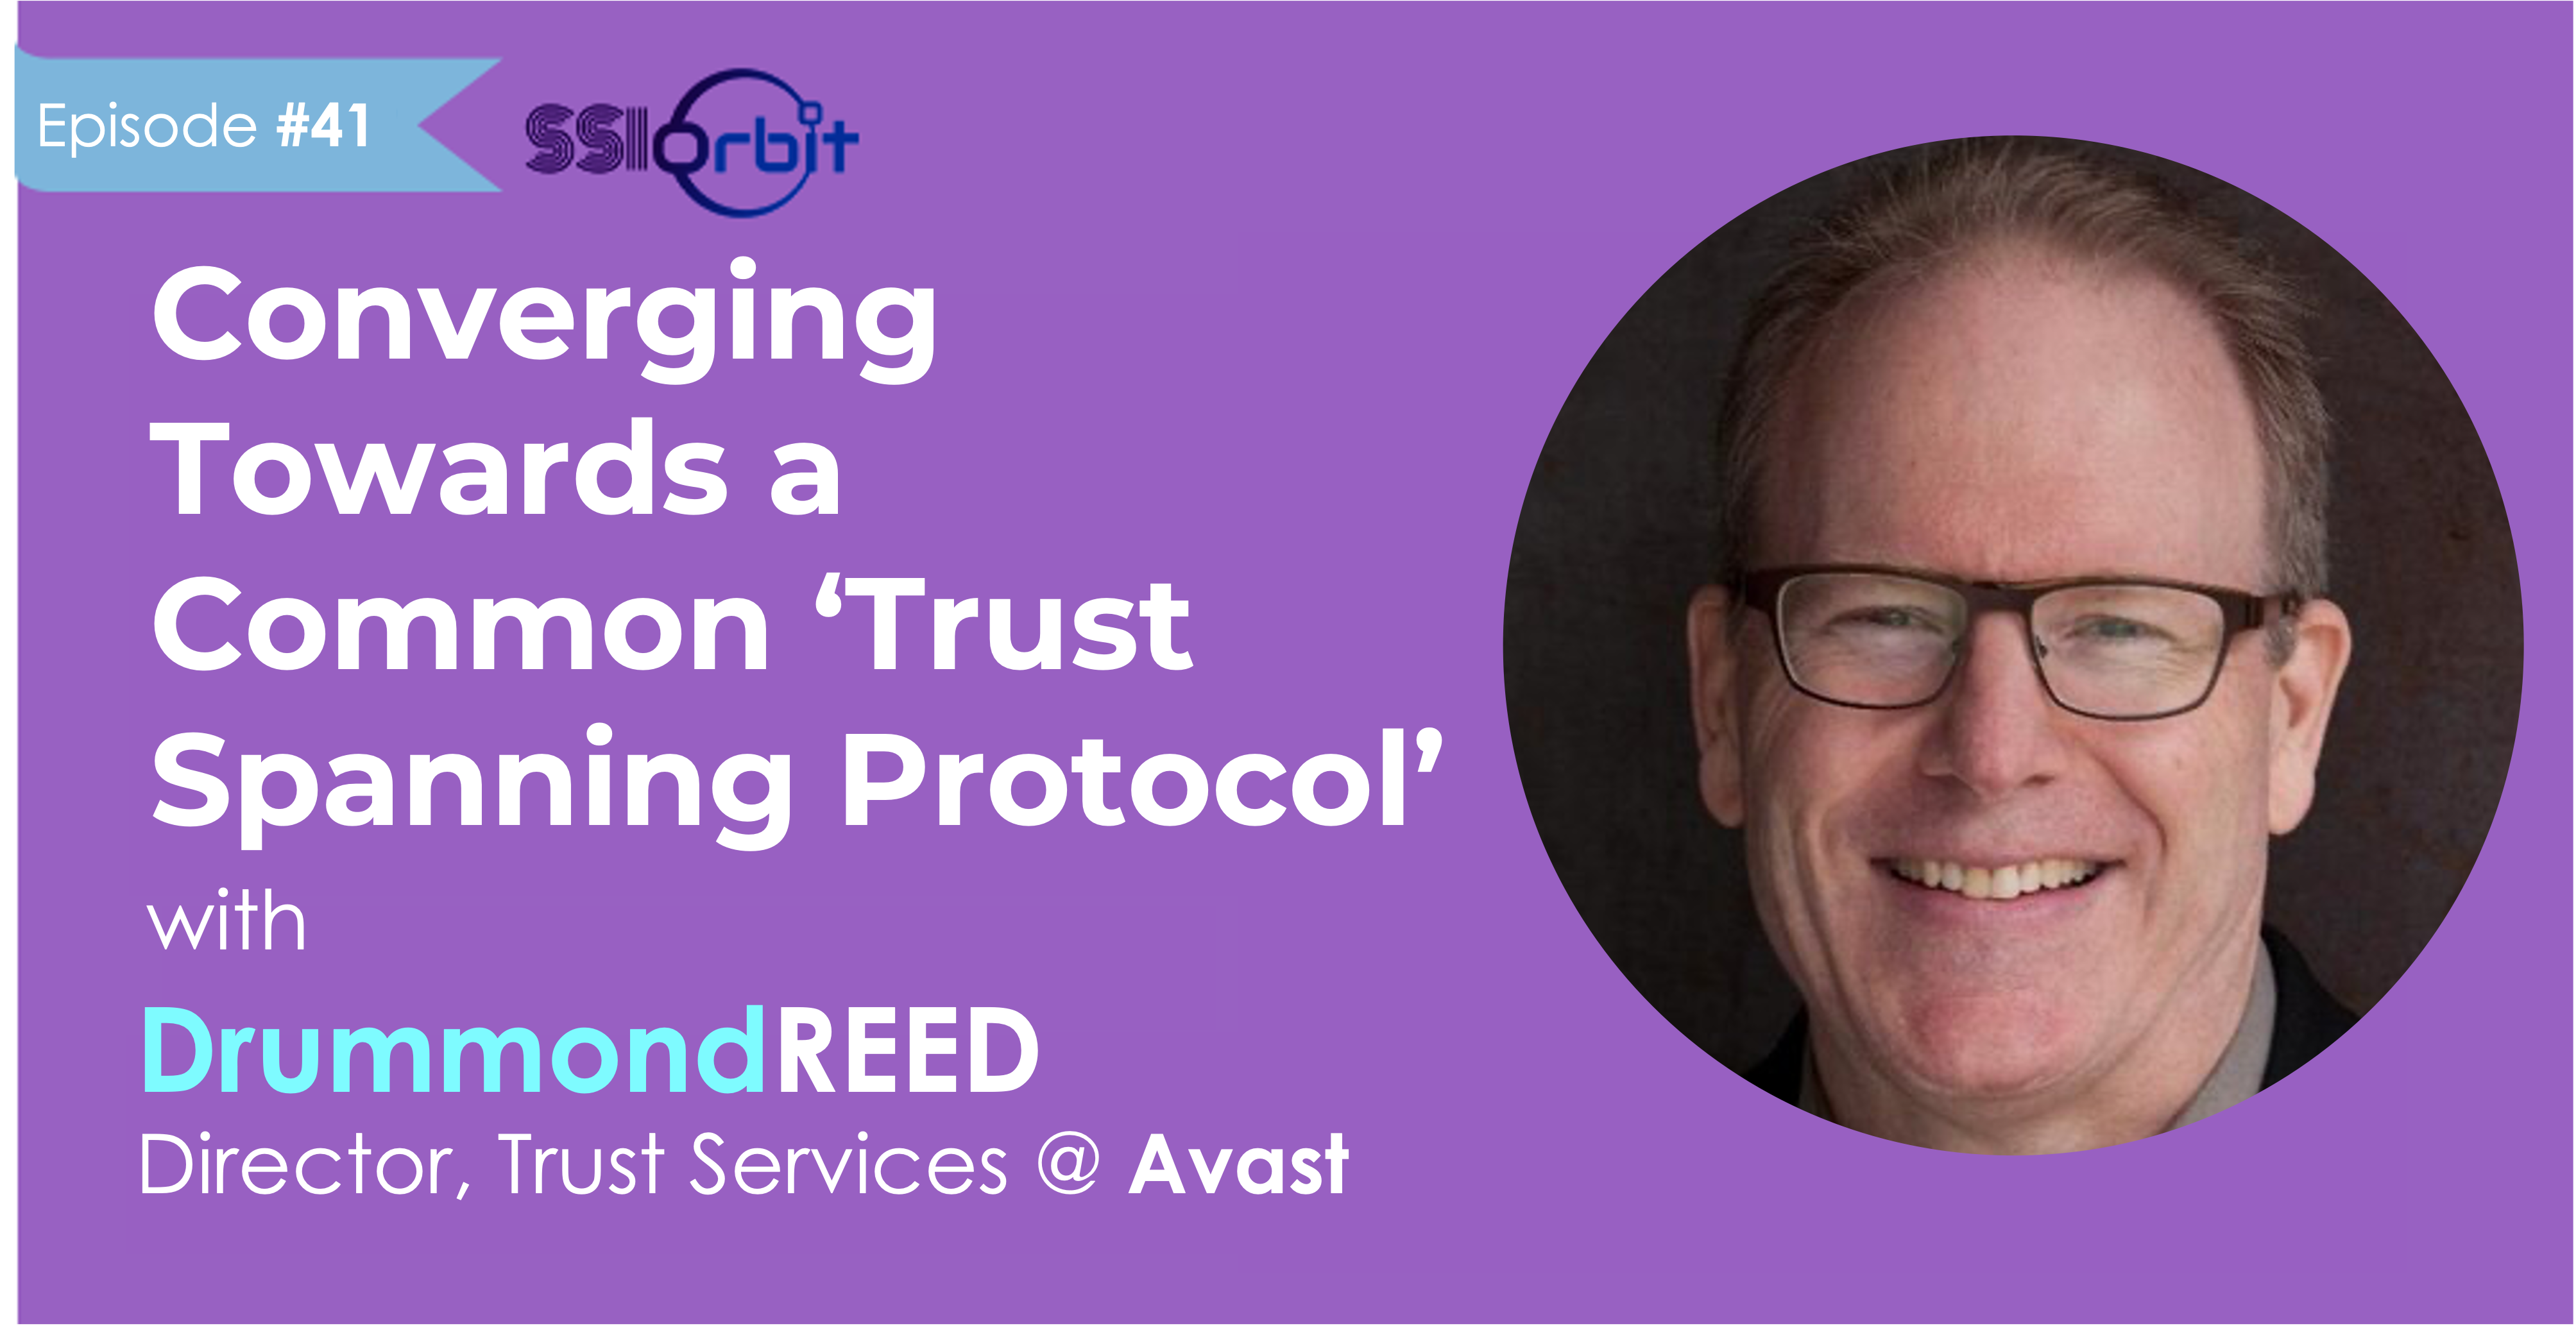 Converging Towards a Common Trust Spanning Protocol (with Drummond Reed)